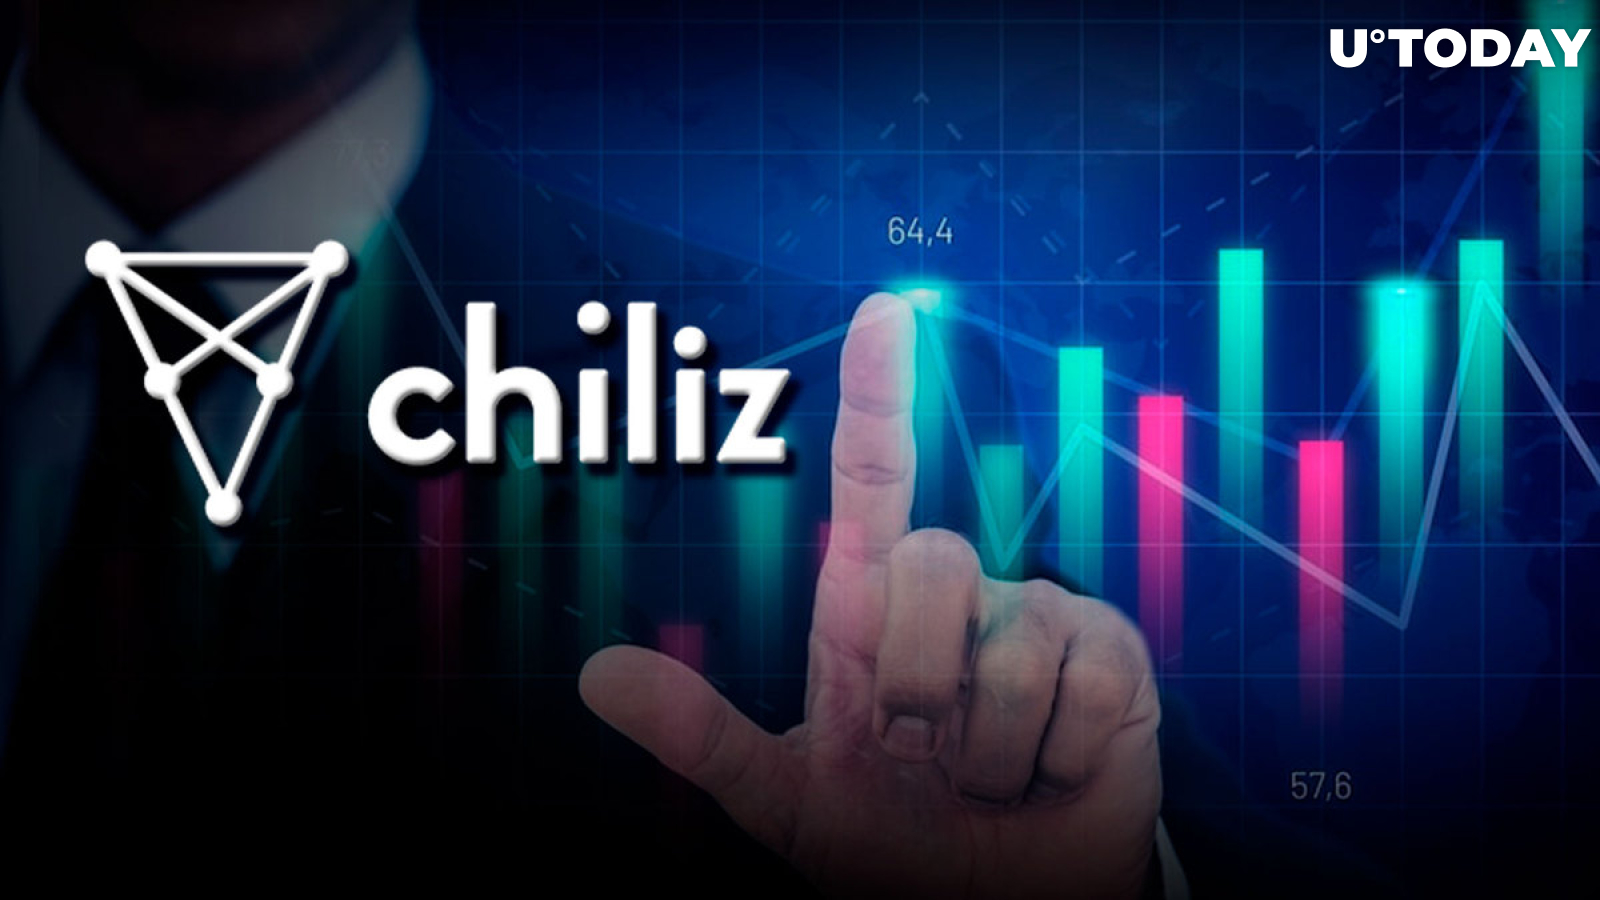 Chiliz (CHZ) at Top of Crypto Market with 8.2% Growth, Here's Why